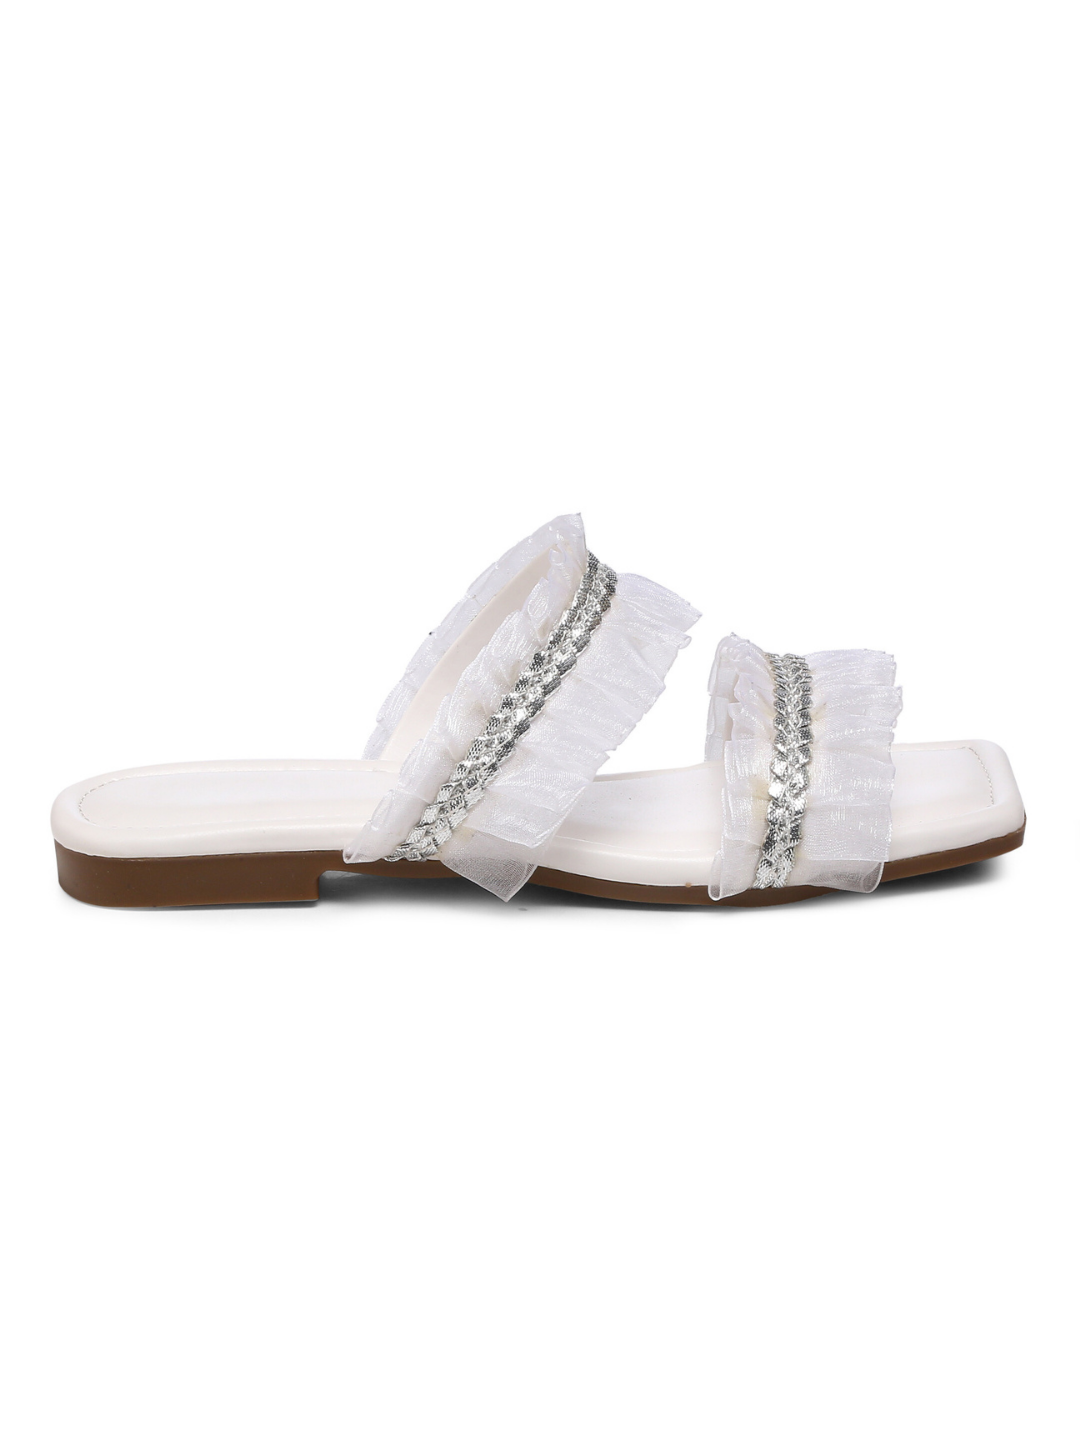 GNIST White Double Strap Ruffle Flats